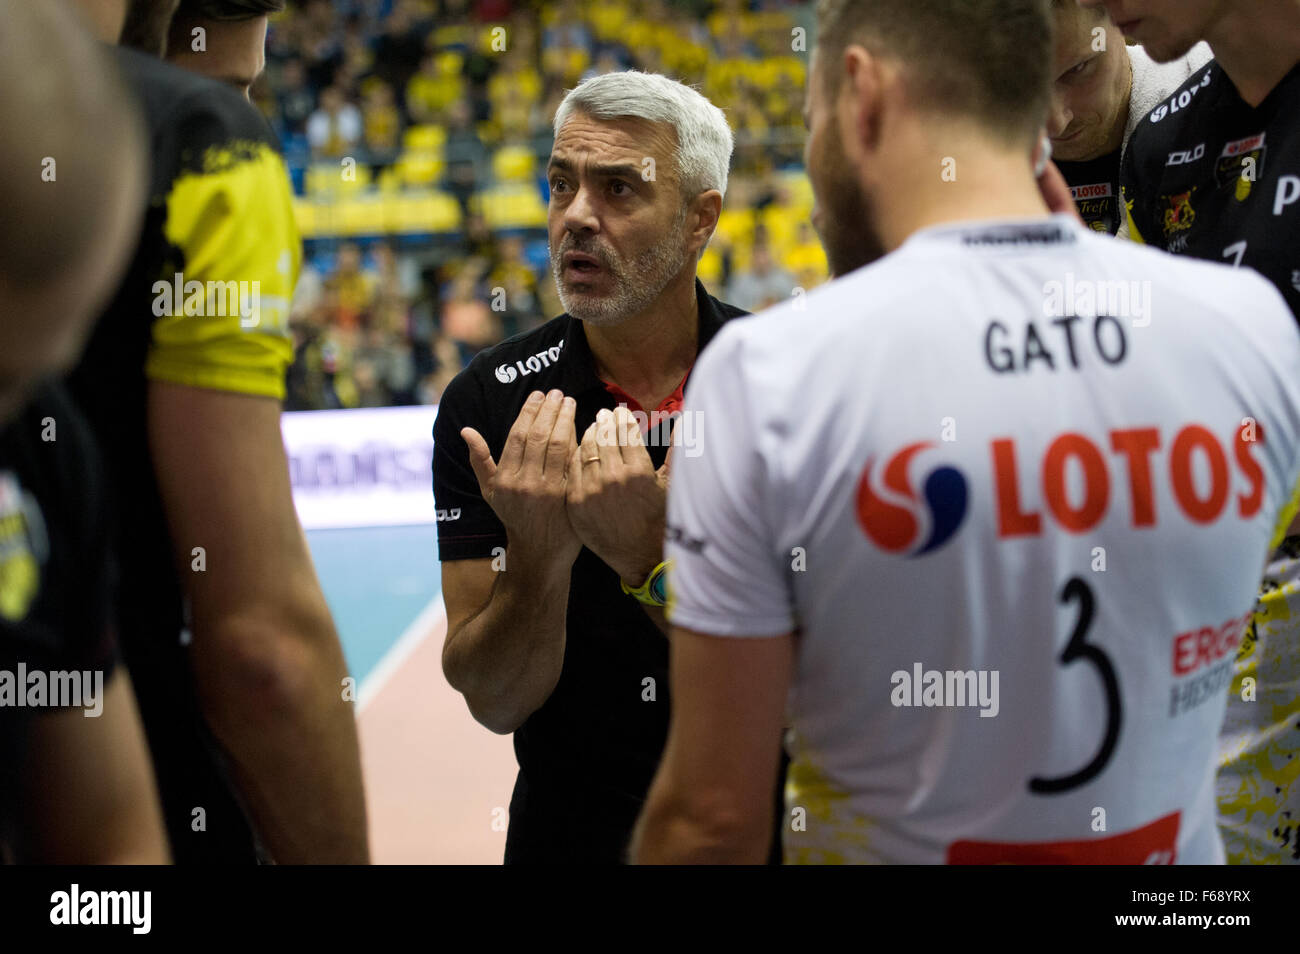 Belchatow, Poland. 14th November 2015. Andrea Anastasi coach of Lotos Trefl Gdansk, gives directives to his team, during a game against  PGE Skra Belchatow in the Plus Liga Polish Professional Volleyball League. Team PGE Skra went on to win 3-0. Credit:  Marcin Rozpedowski/Alamy Live News Stock Photo